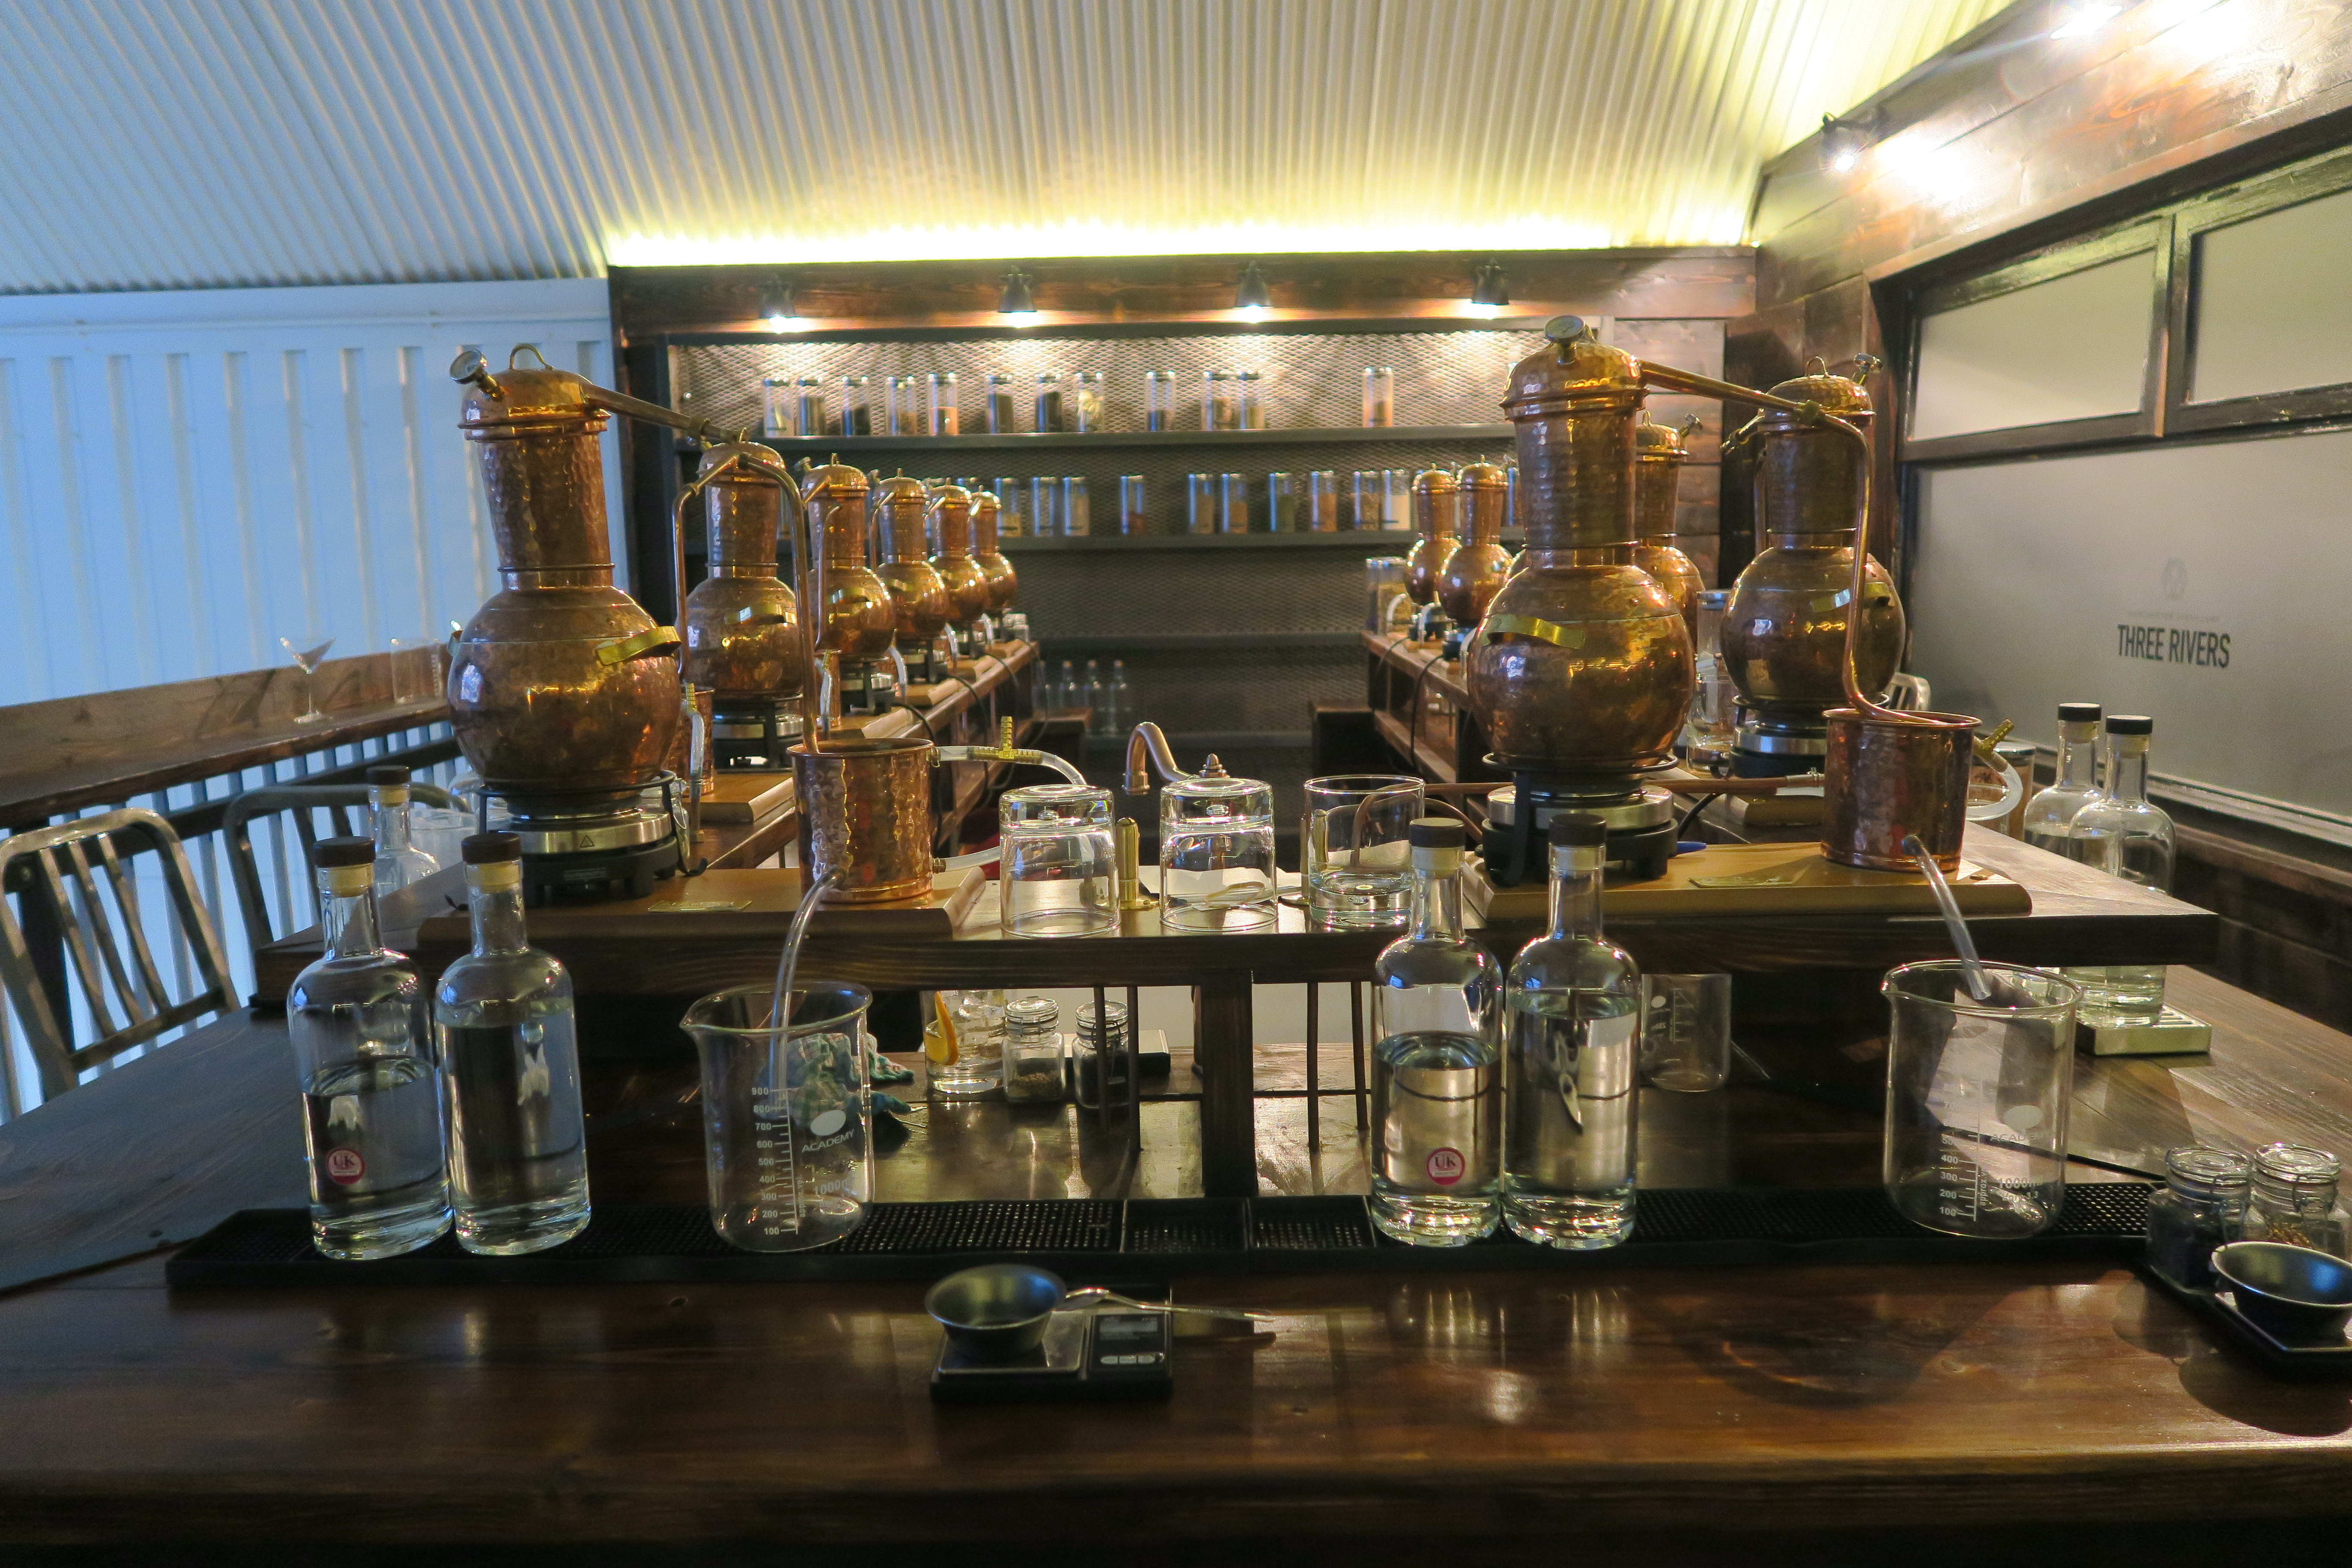 three-rivers-gin-manchester-gin-experience-20